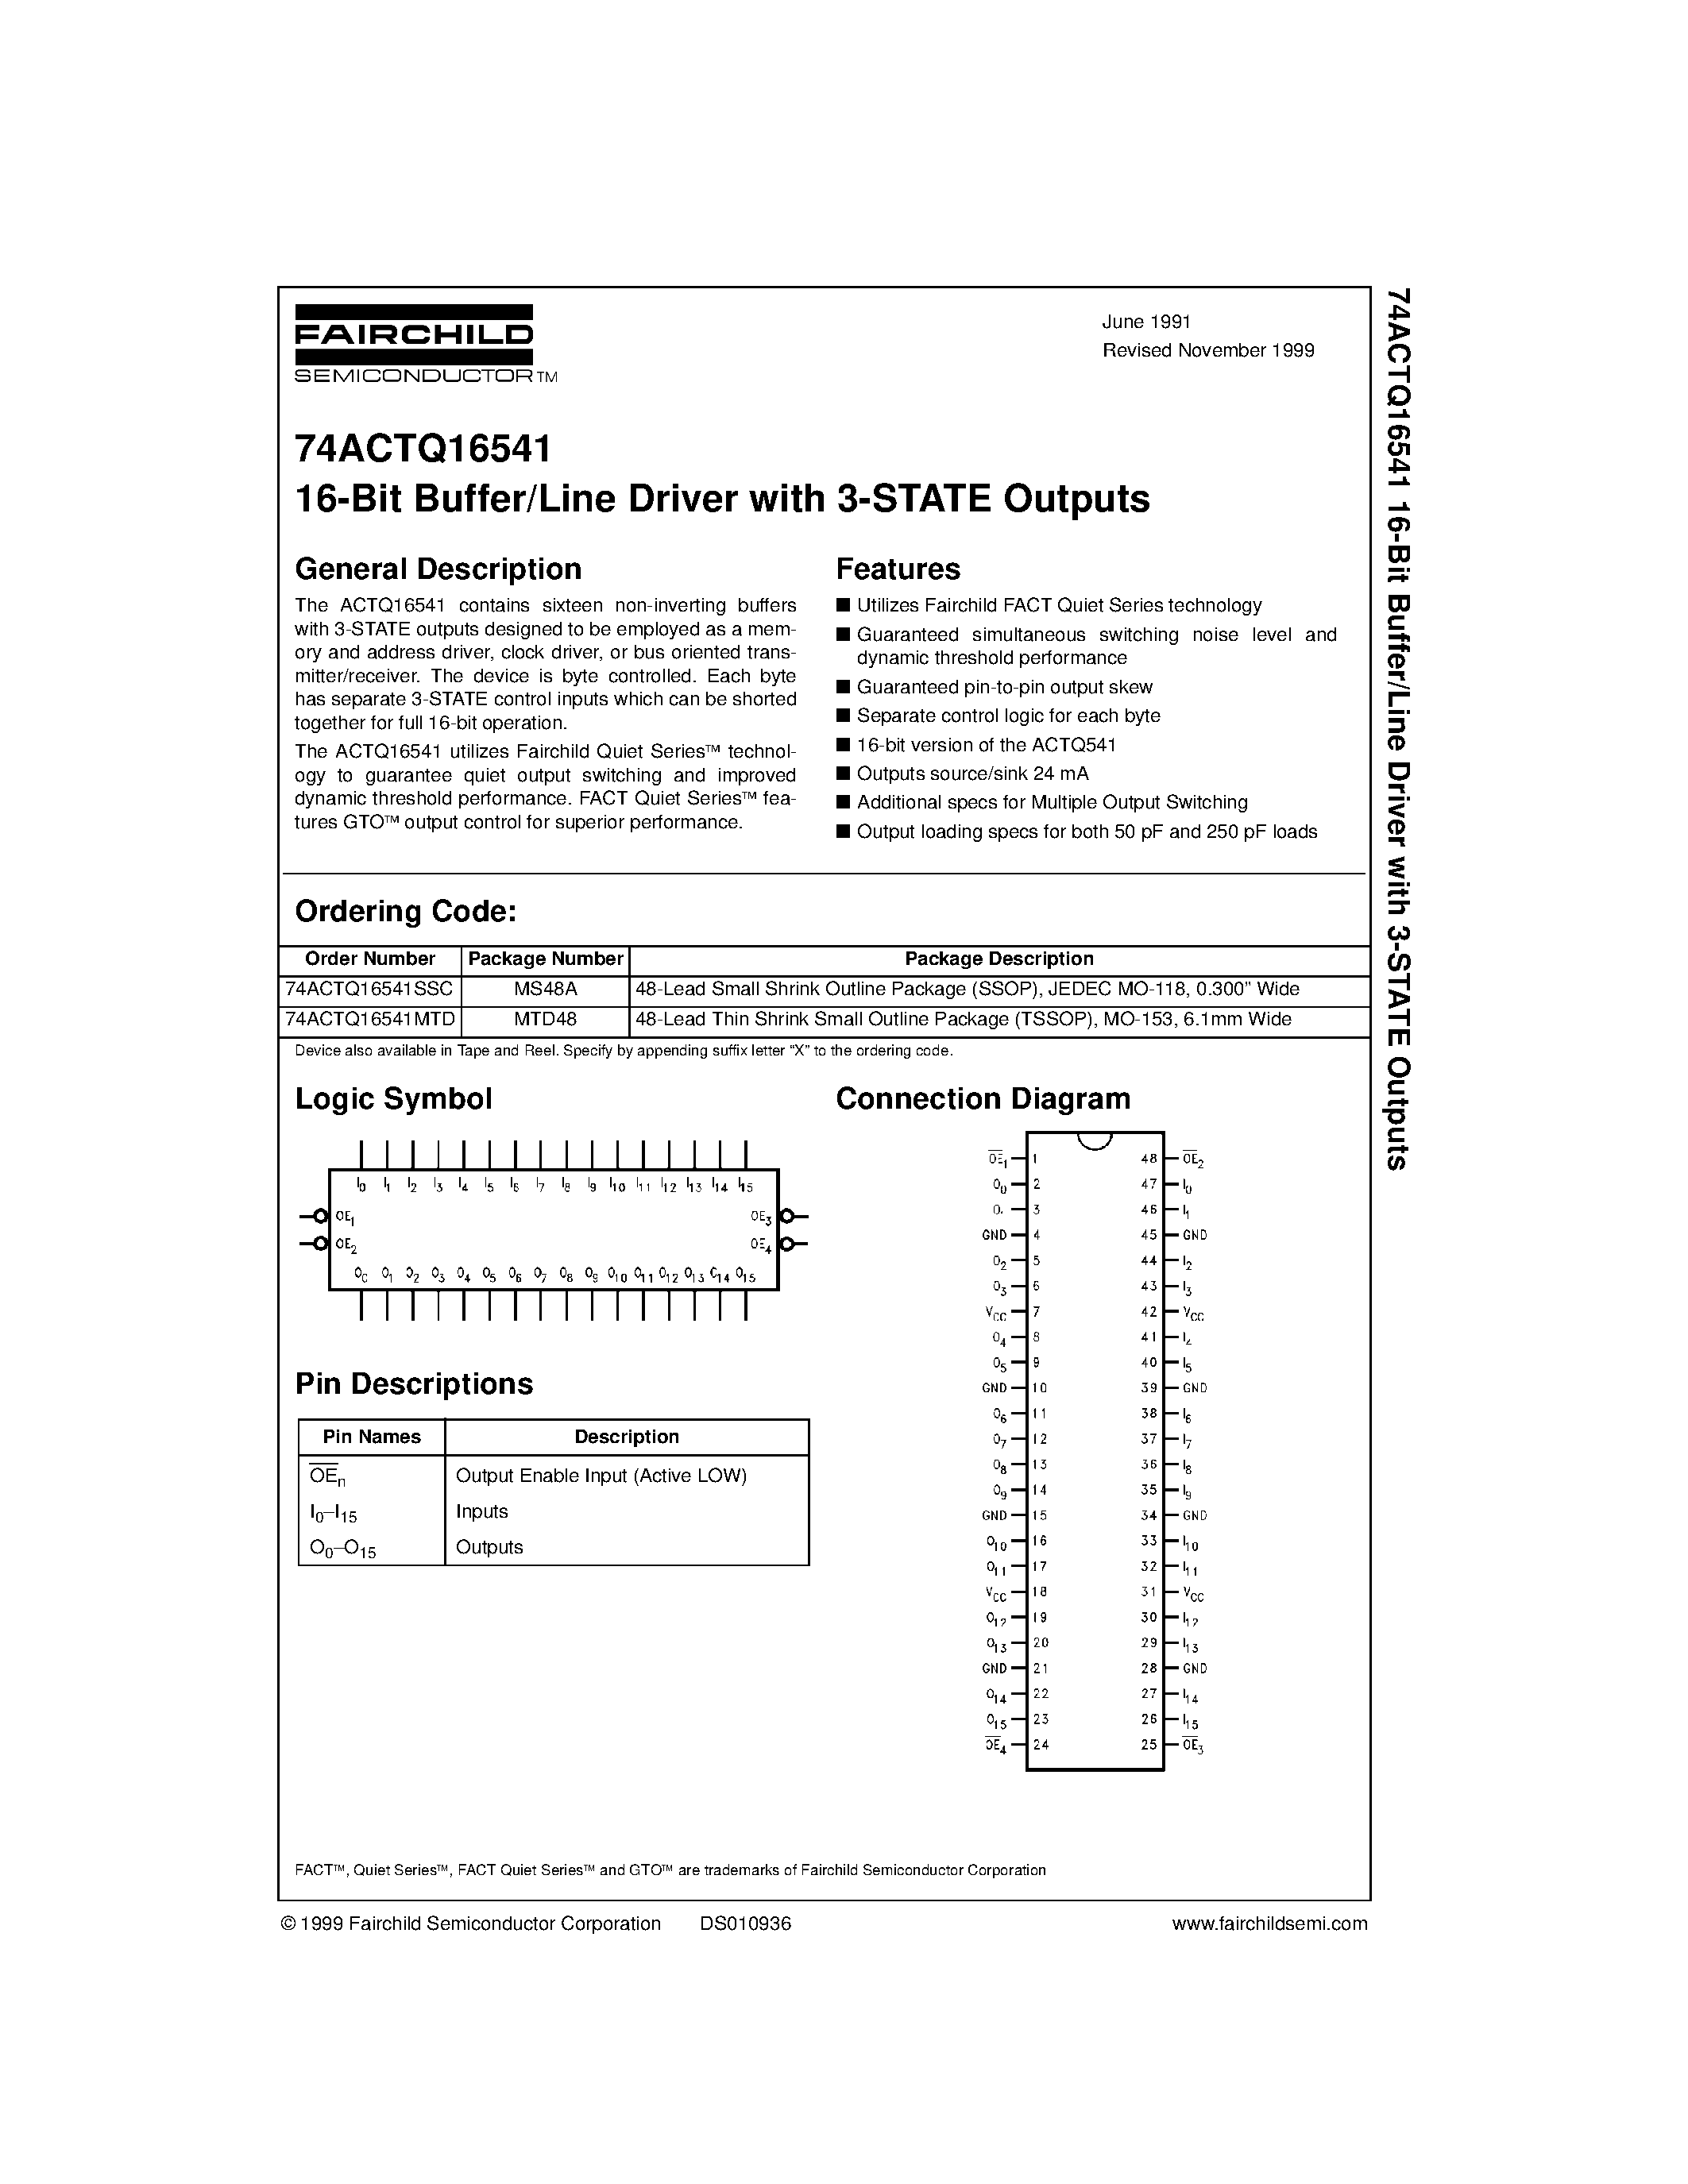 Datasheet 74ACTQ16541 - 16-Bit Buffer/Line Driver with 3-STATE Outputs page 1